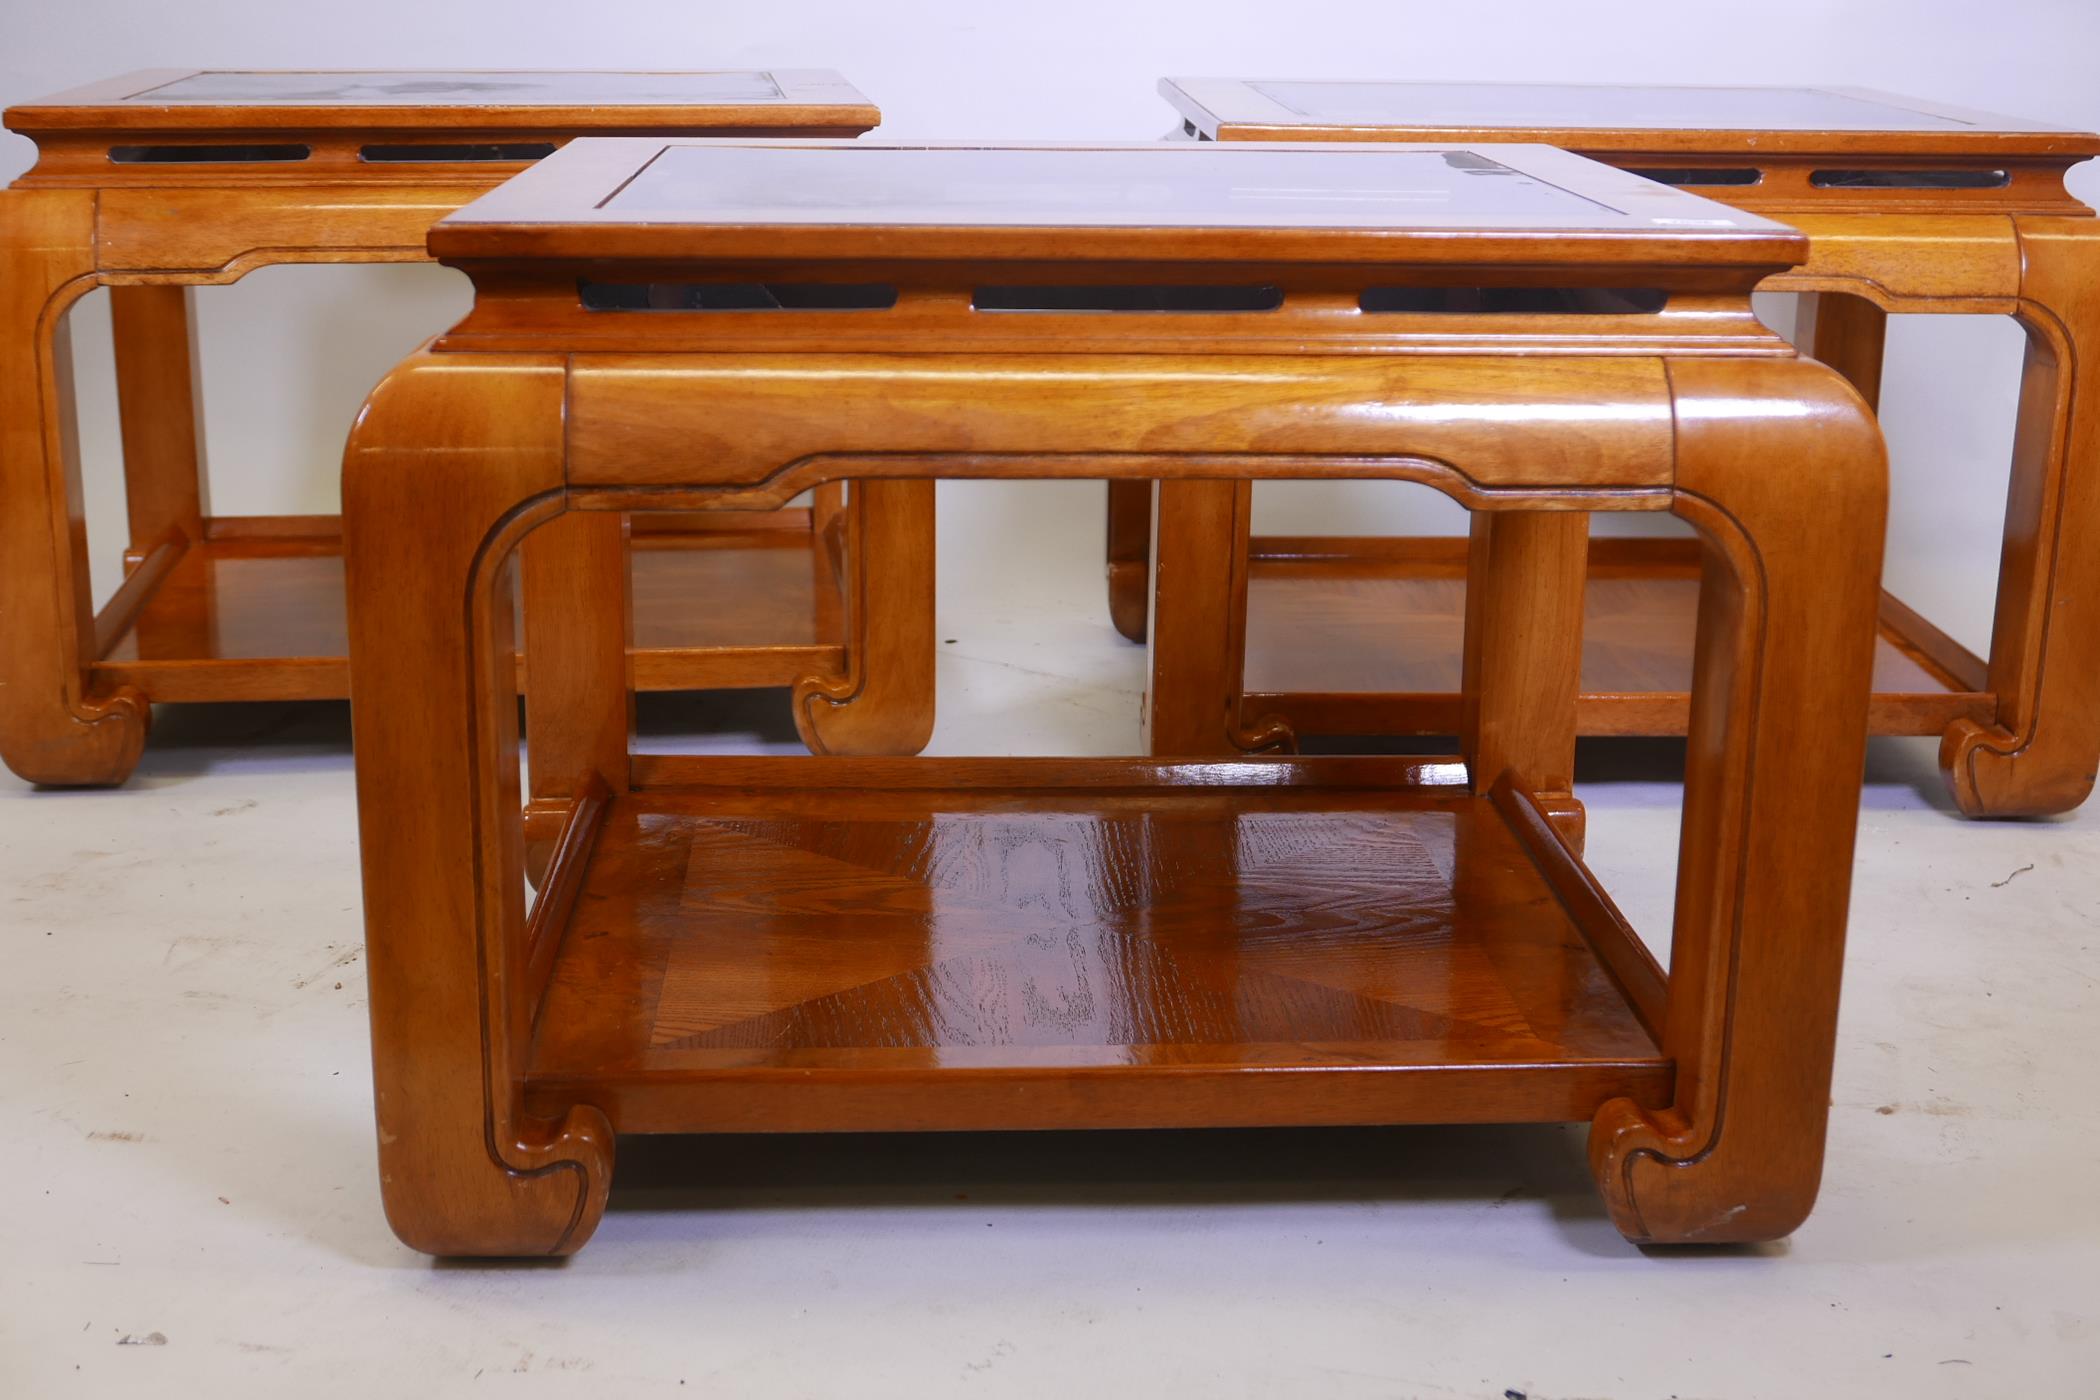 Three matching oriental style figured elm lamp tables, each with inset tinted glass, 25" x 25" x 22" - Image 2 of 4